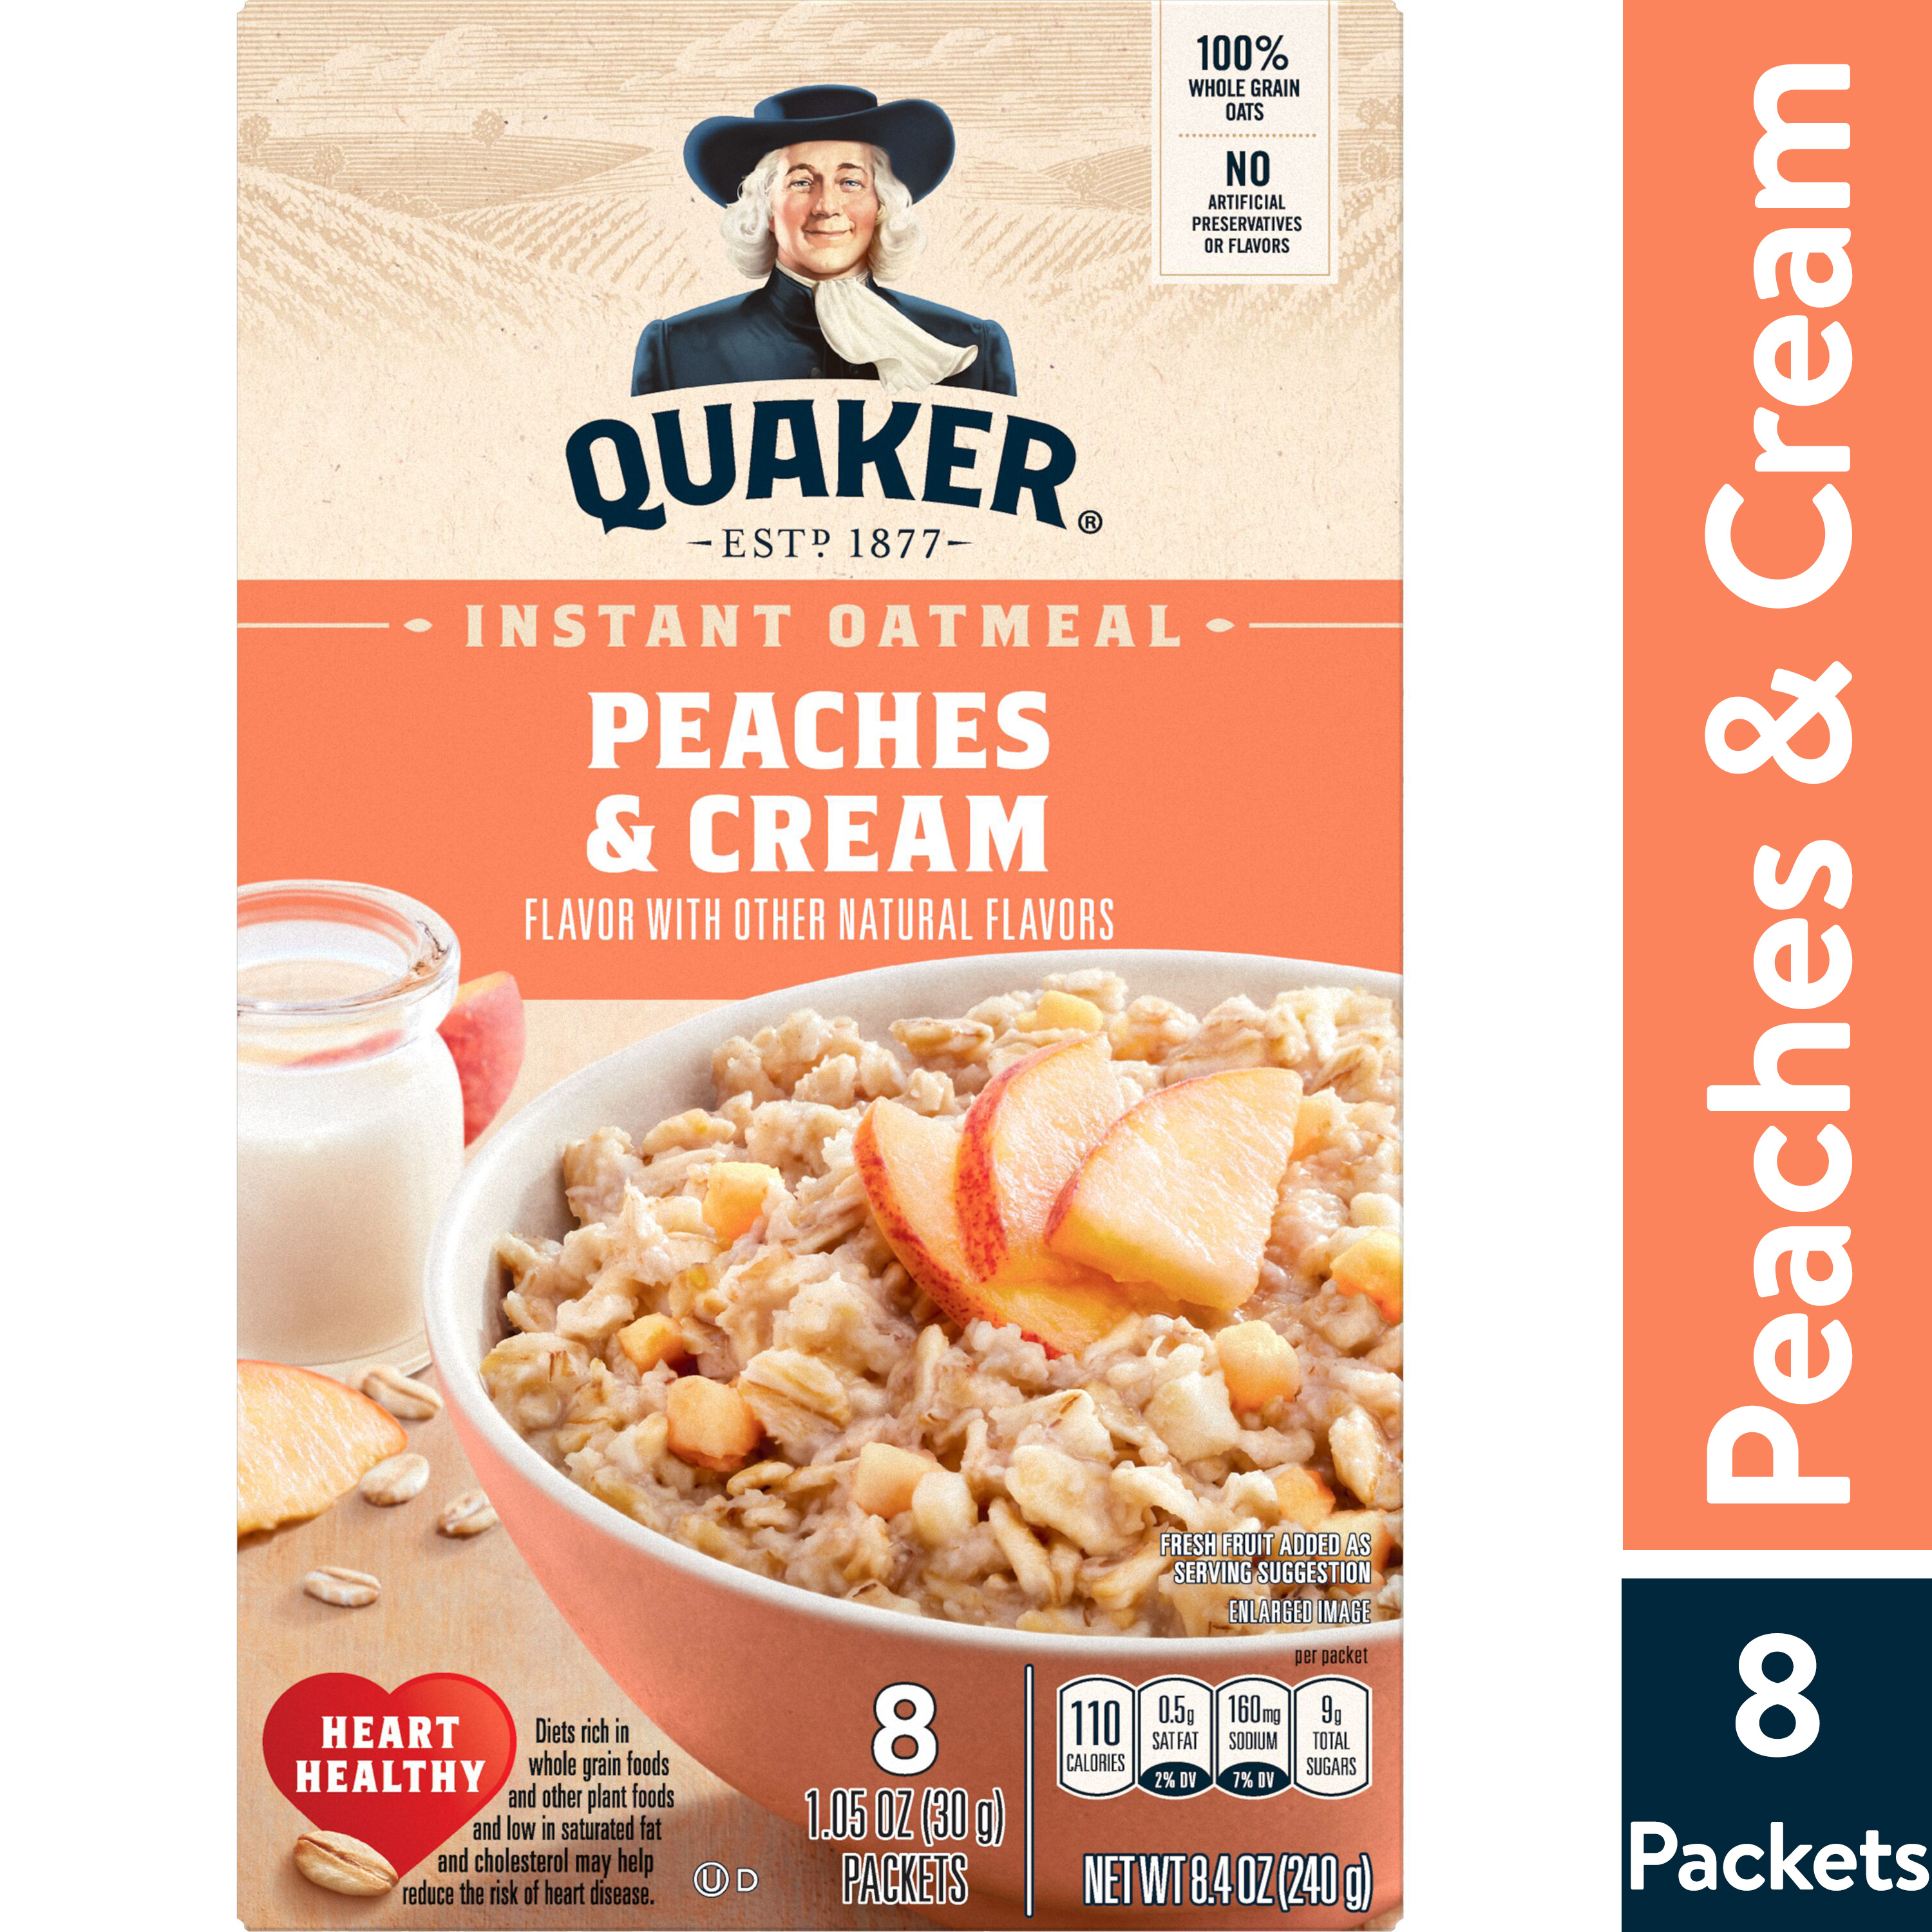 Quaker Instant Oatmeal, Peaches & Cream, 1.05 oz, 8 Packets - image 1 of 14